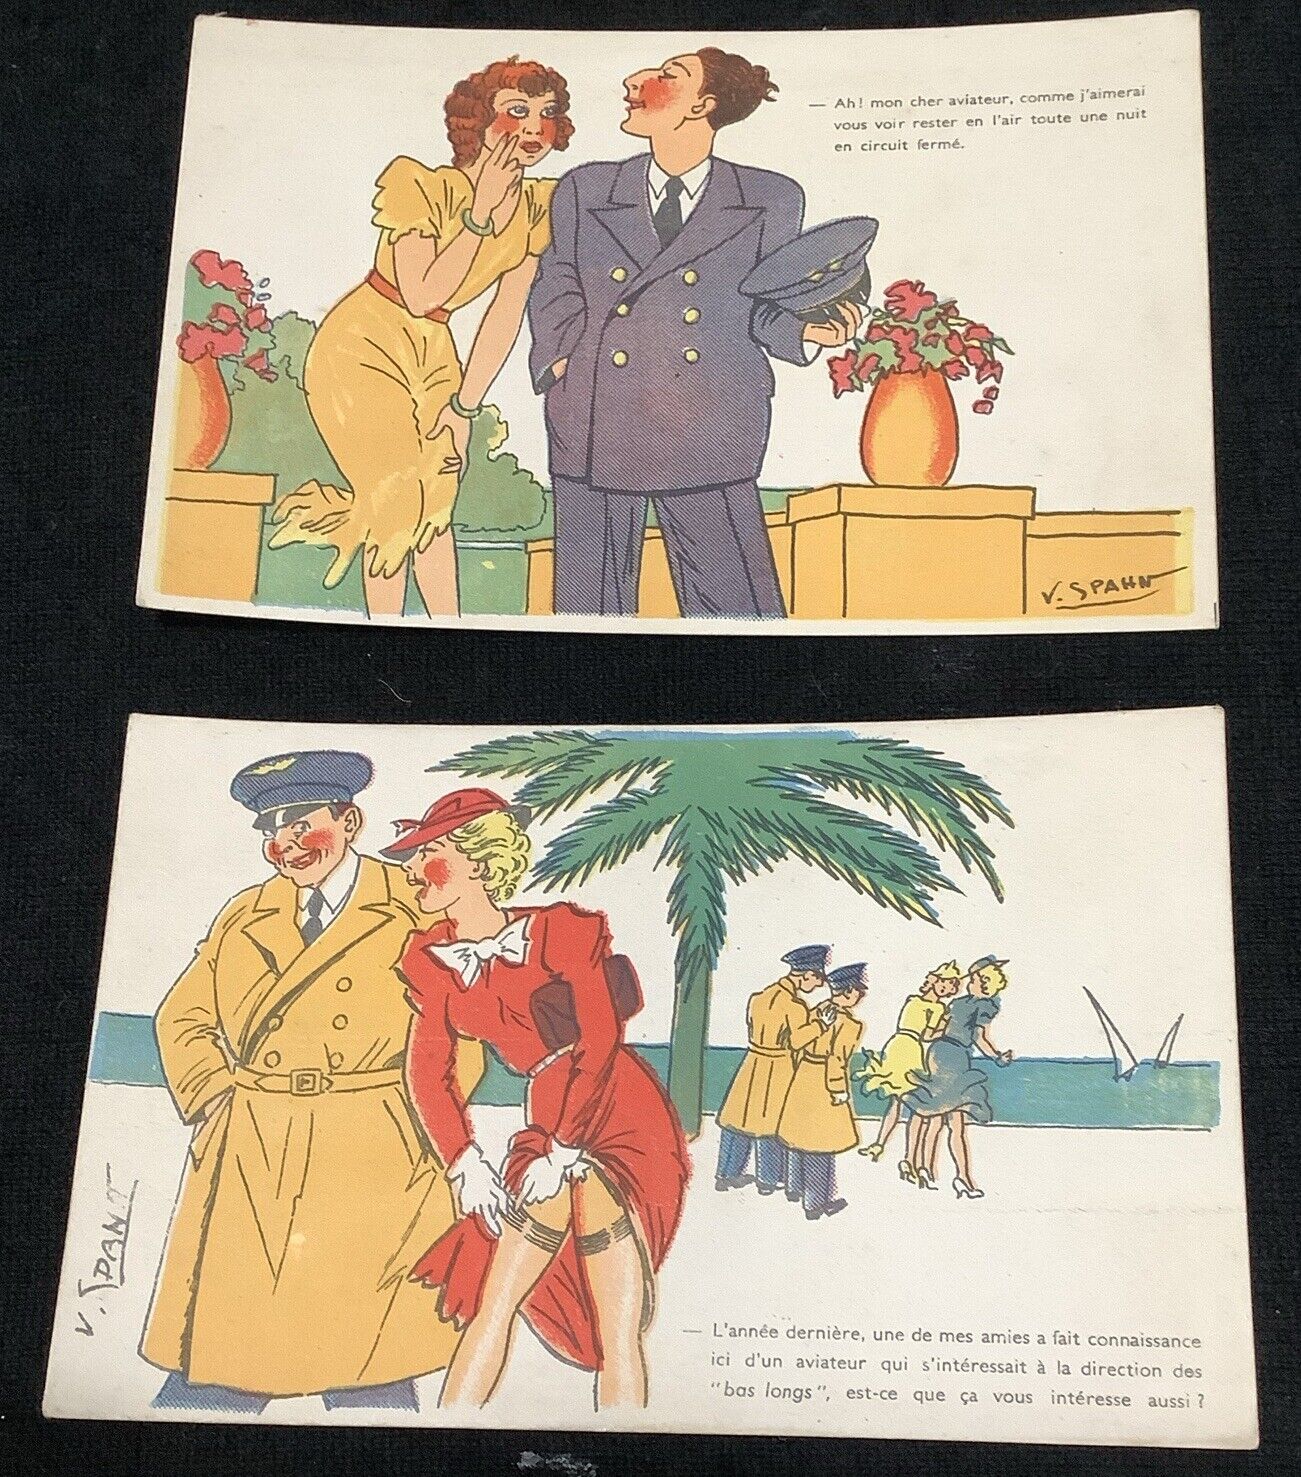 V. Spahn French Soldiers Vintage Military Postcards Paris France